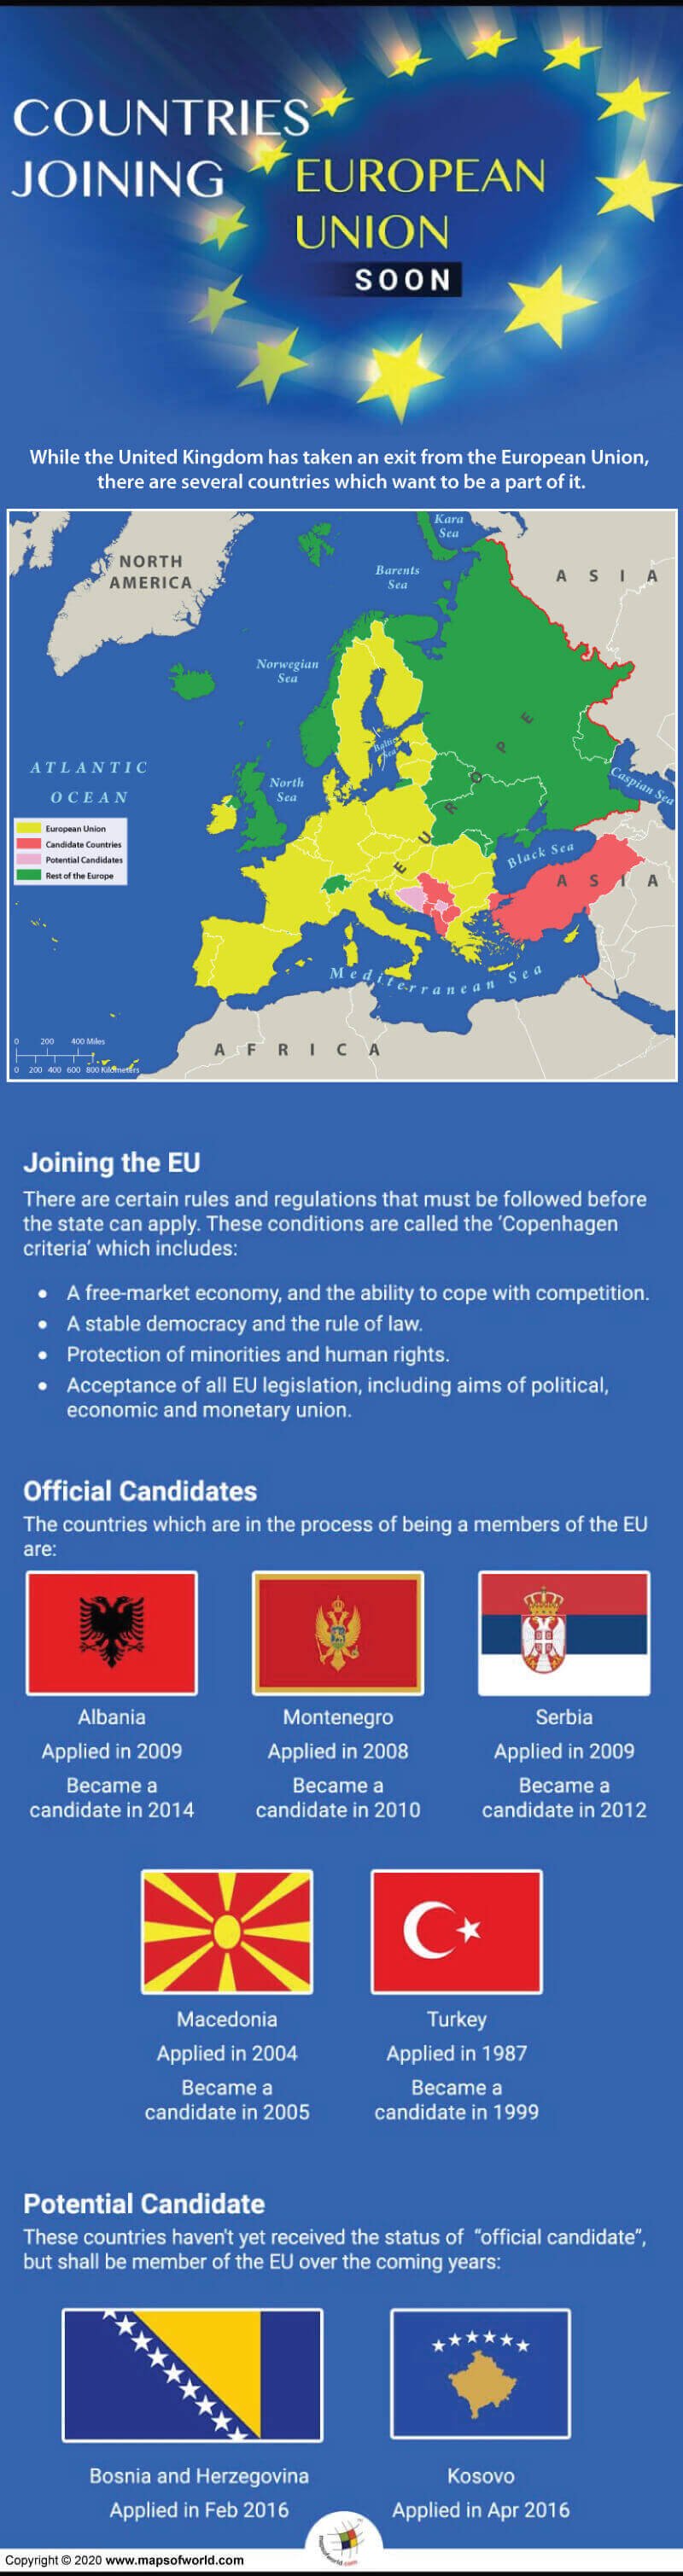 Infographic Giving Details on the Countries Joining the European Union Soon